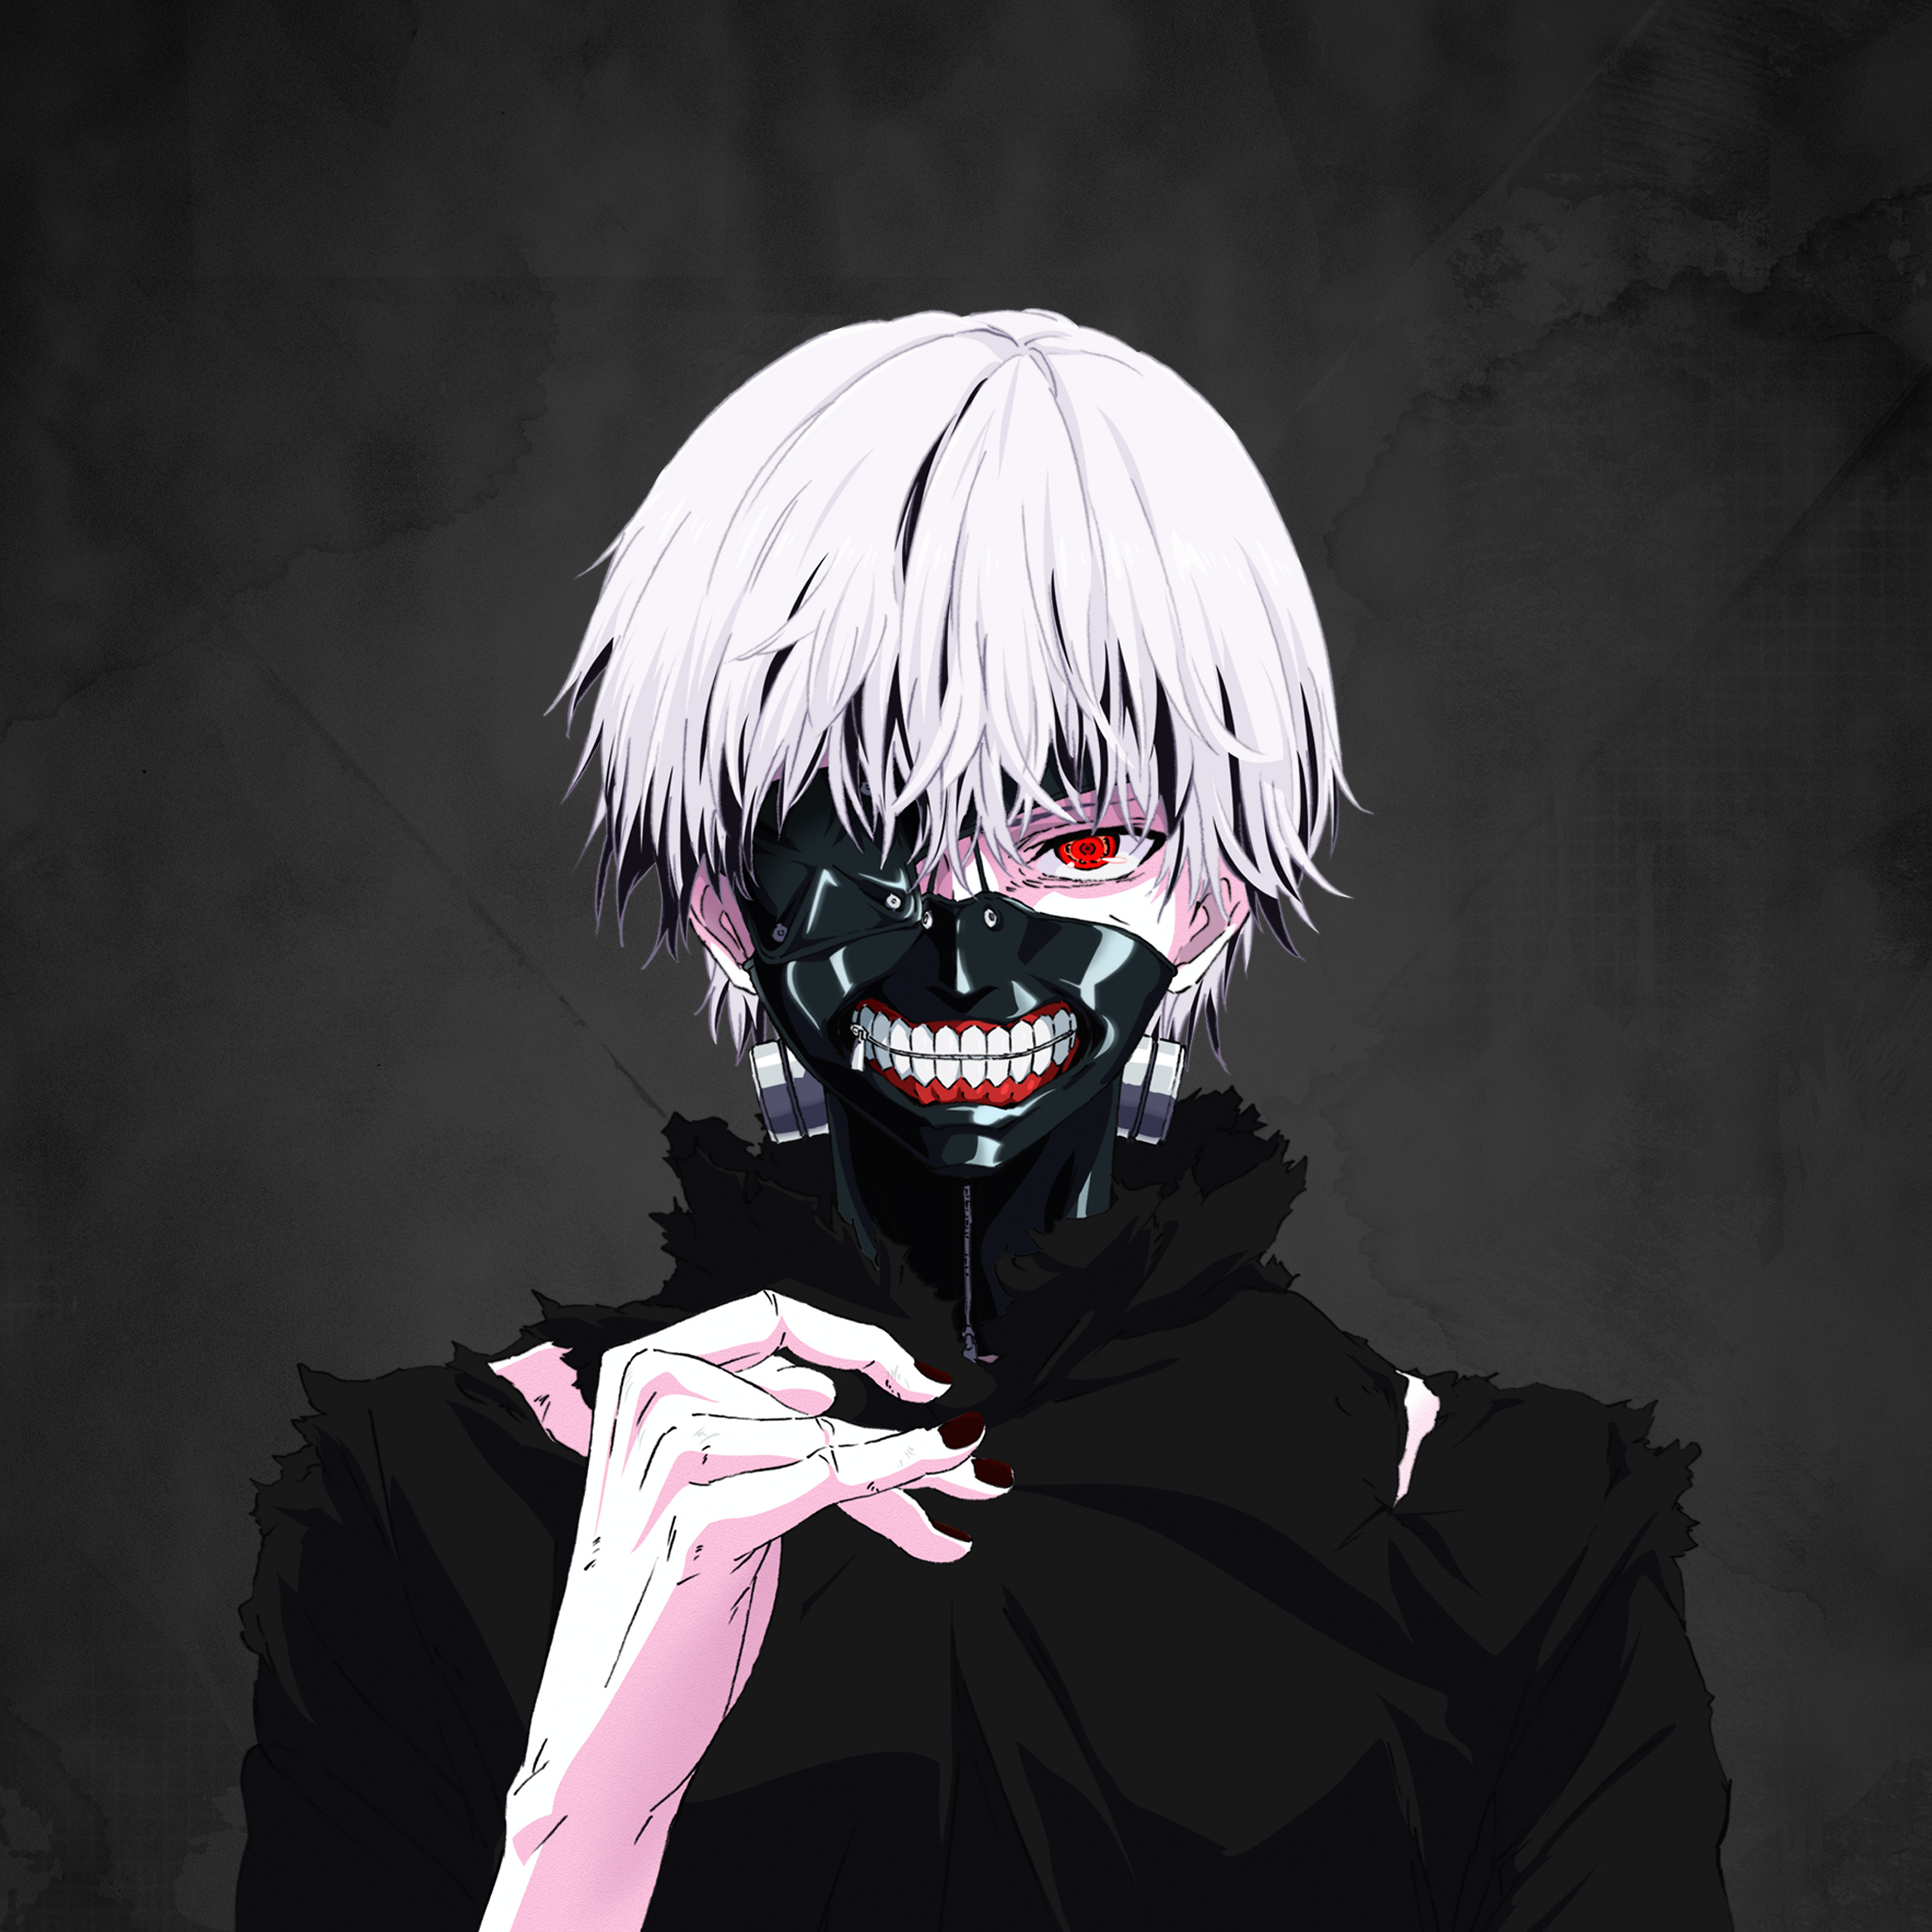 Watch Tokyo Ghoul Sub Dub Action Adventure Drama Fantasy Horror Anime Funimation Please, reload page if you can't watch the video. watch tokyo ghoul sub dub action